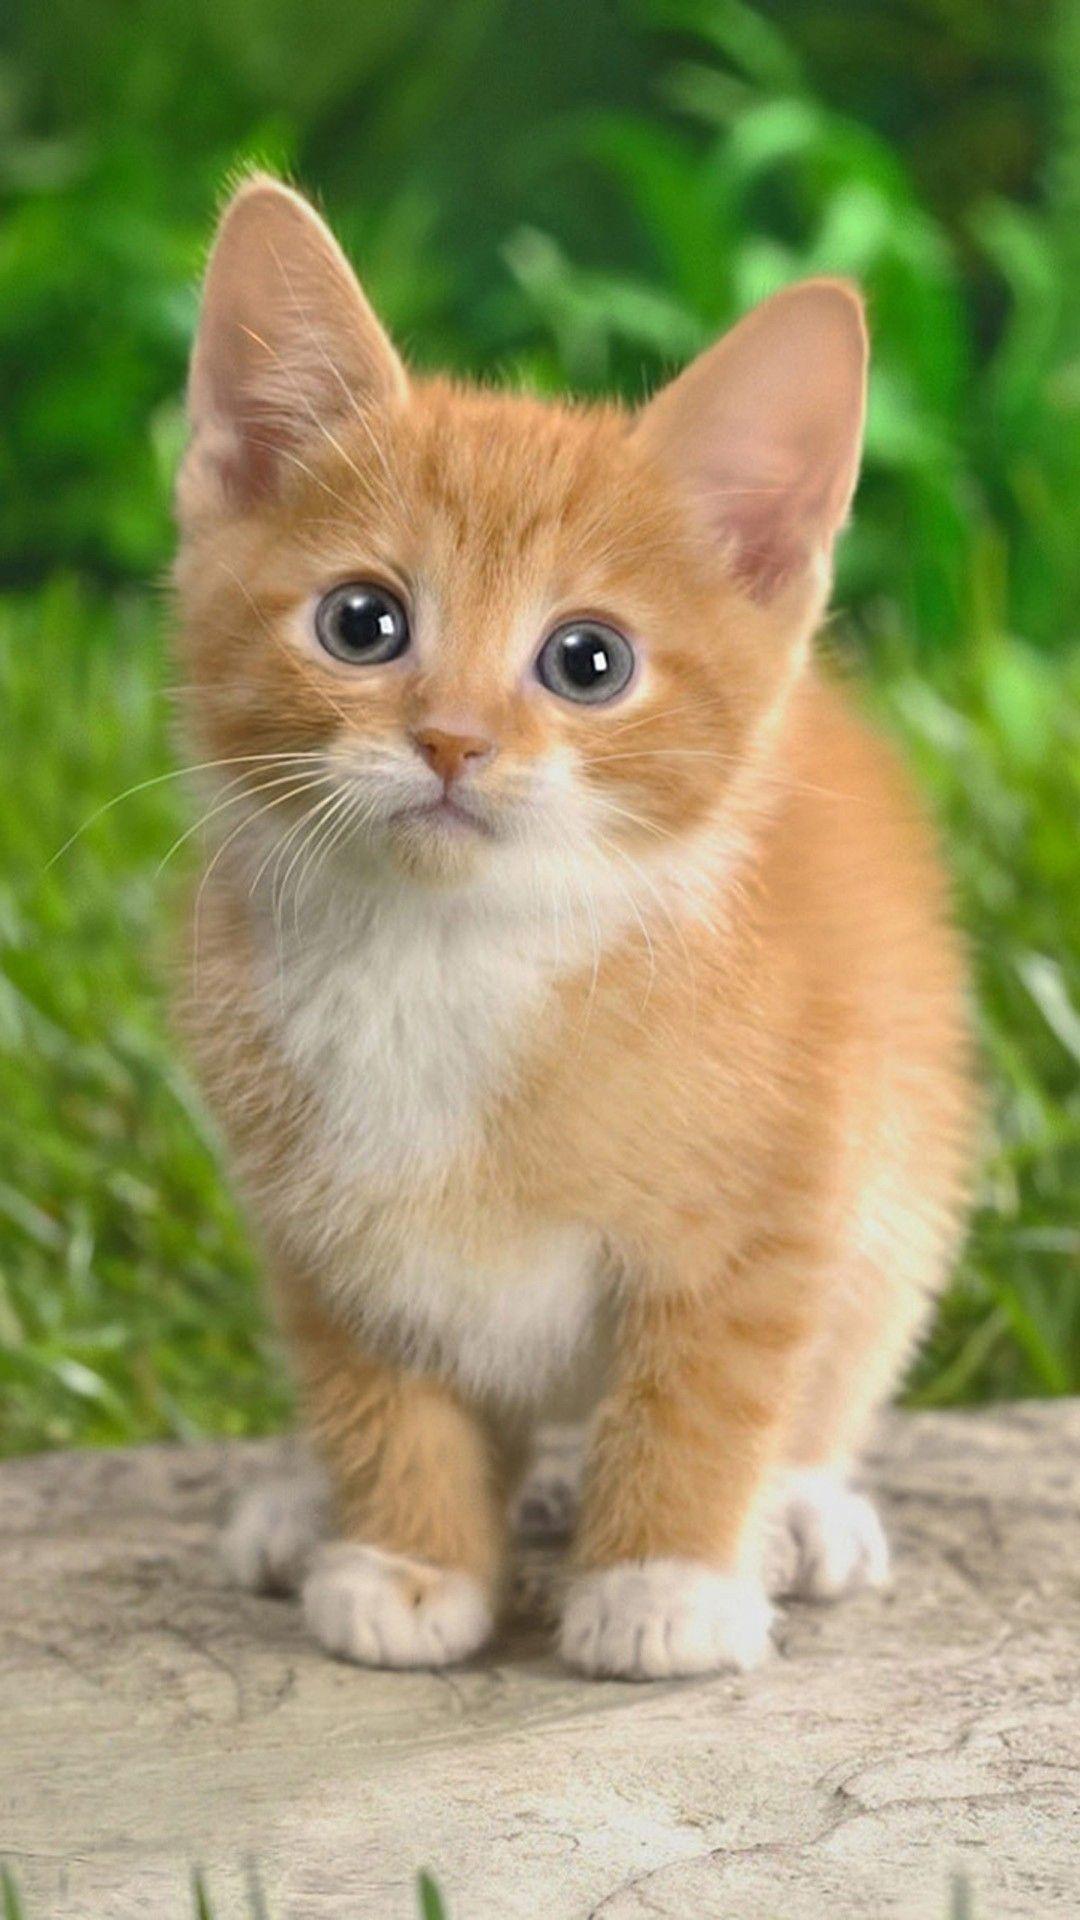 Cute Cats HD Wallpaper for iPhone 7